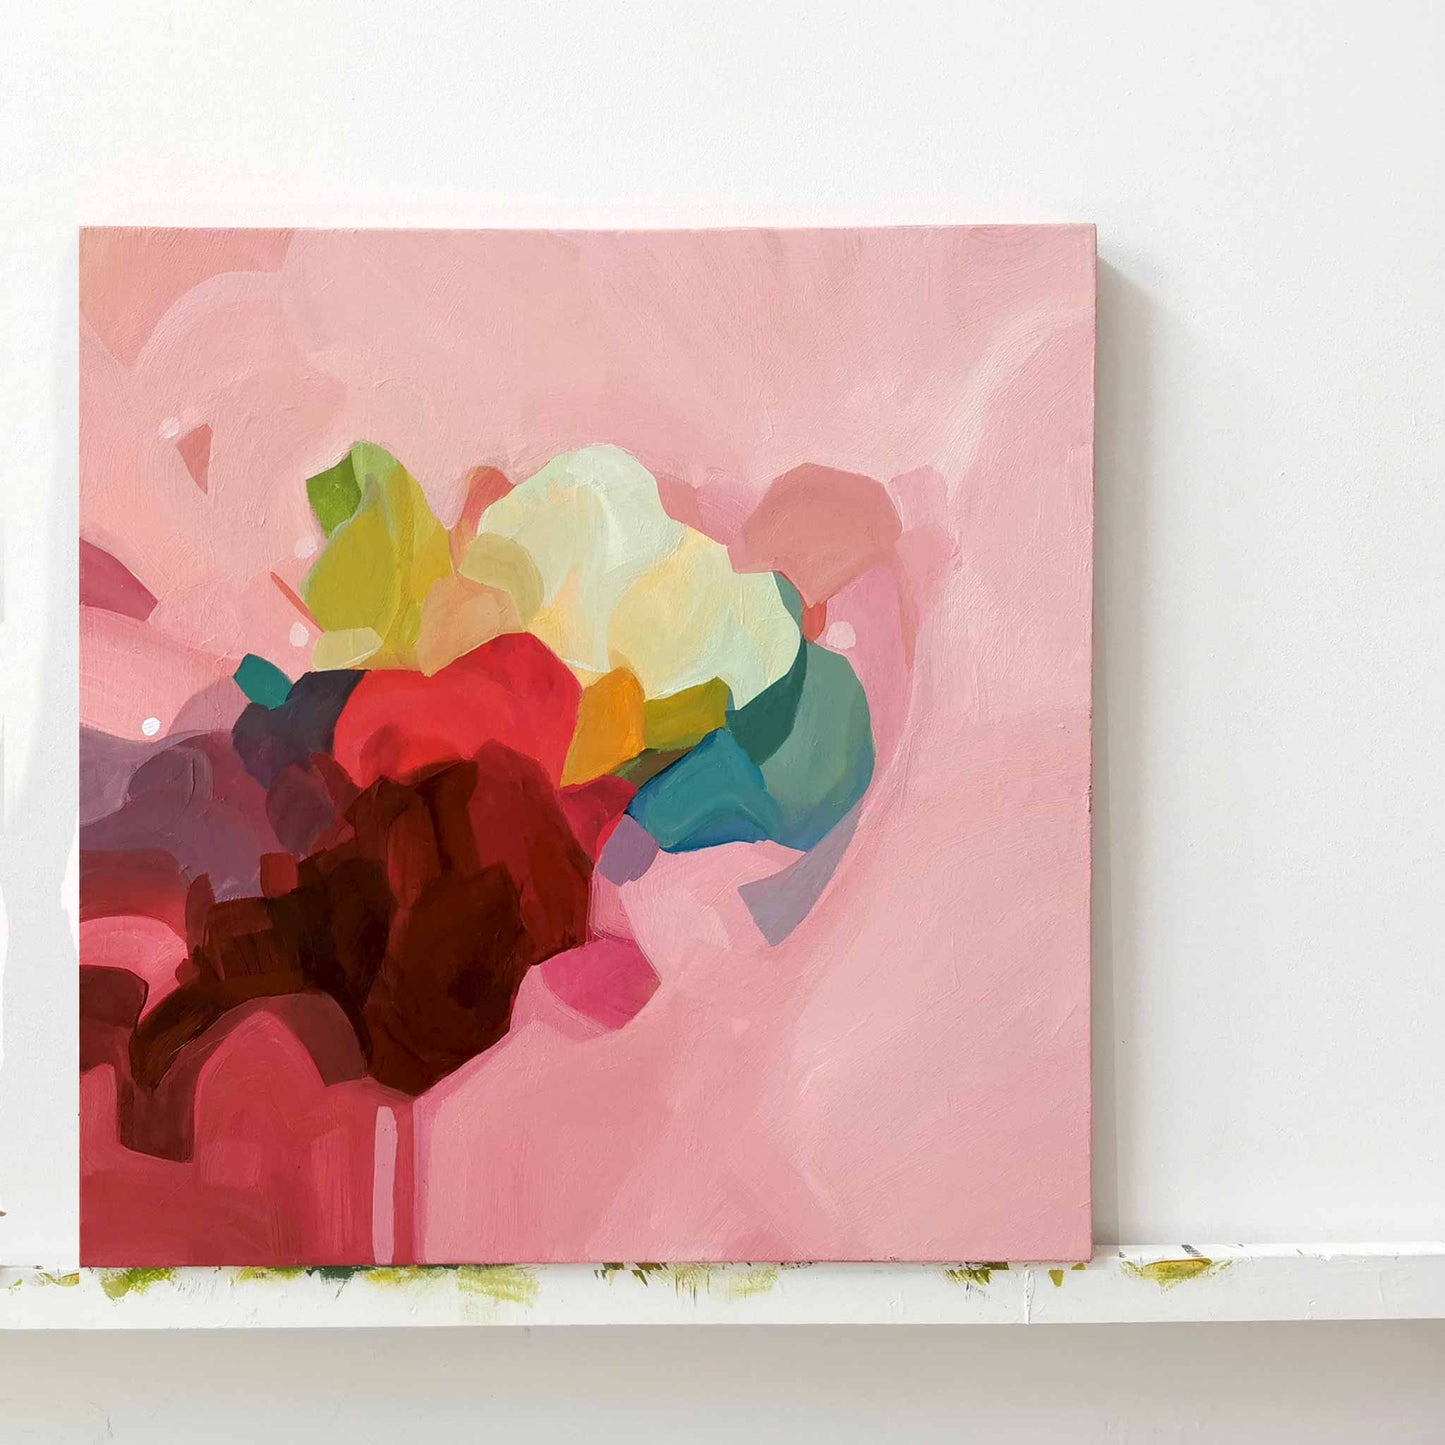 original rose acrylic abstract painting on canvas by Canadian artist Susannah Bleasby